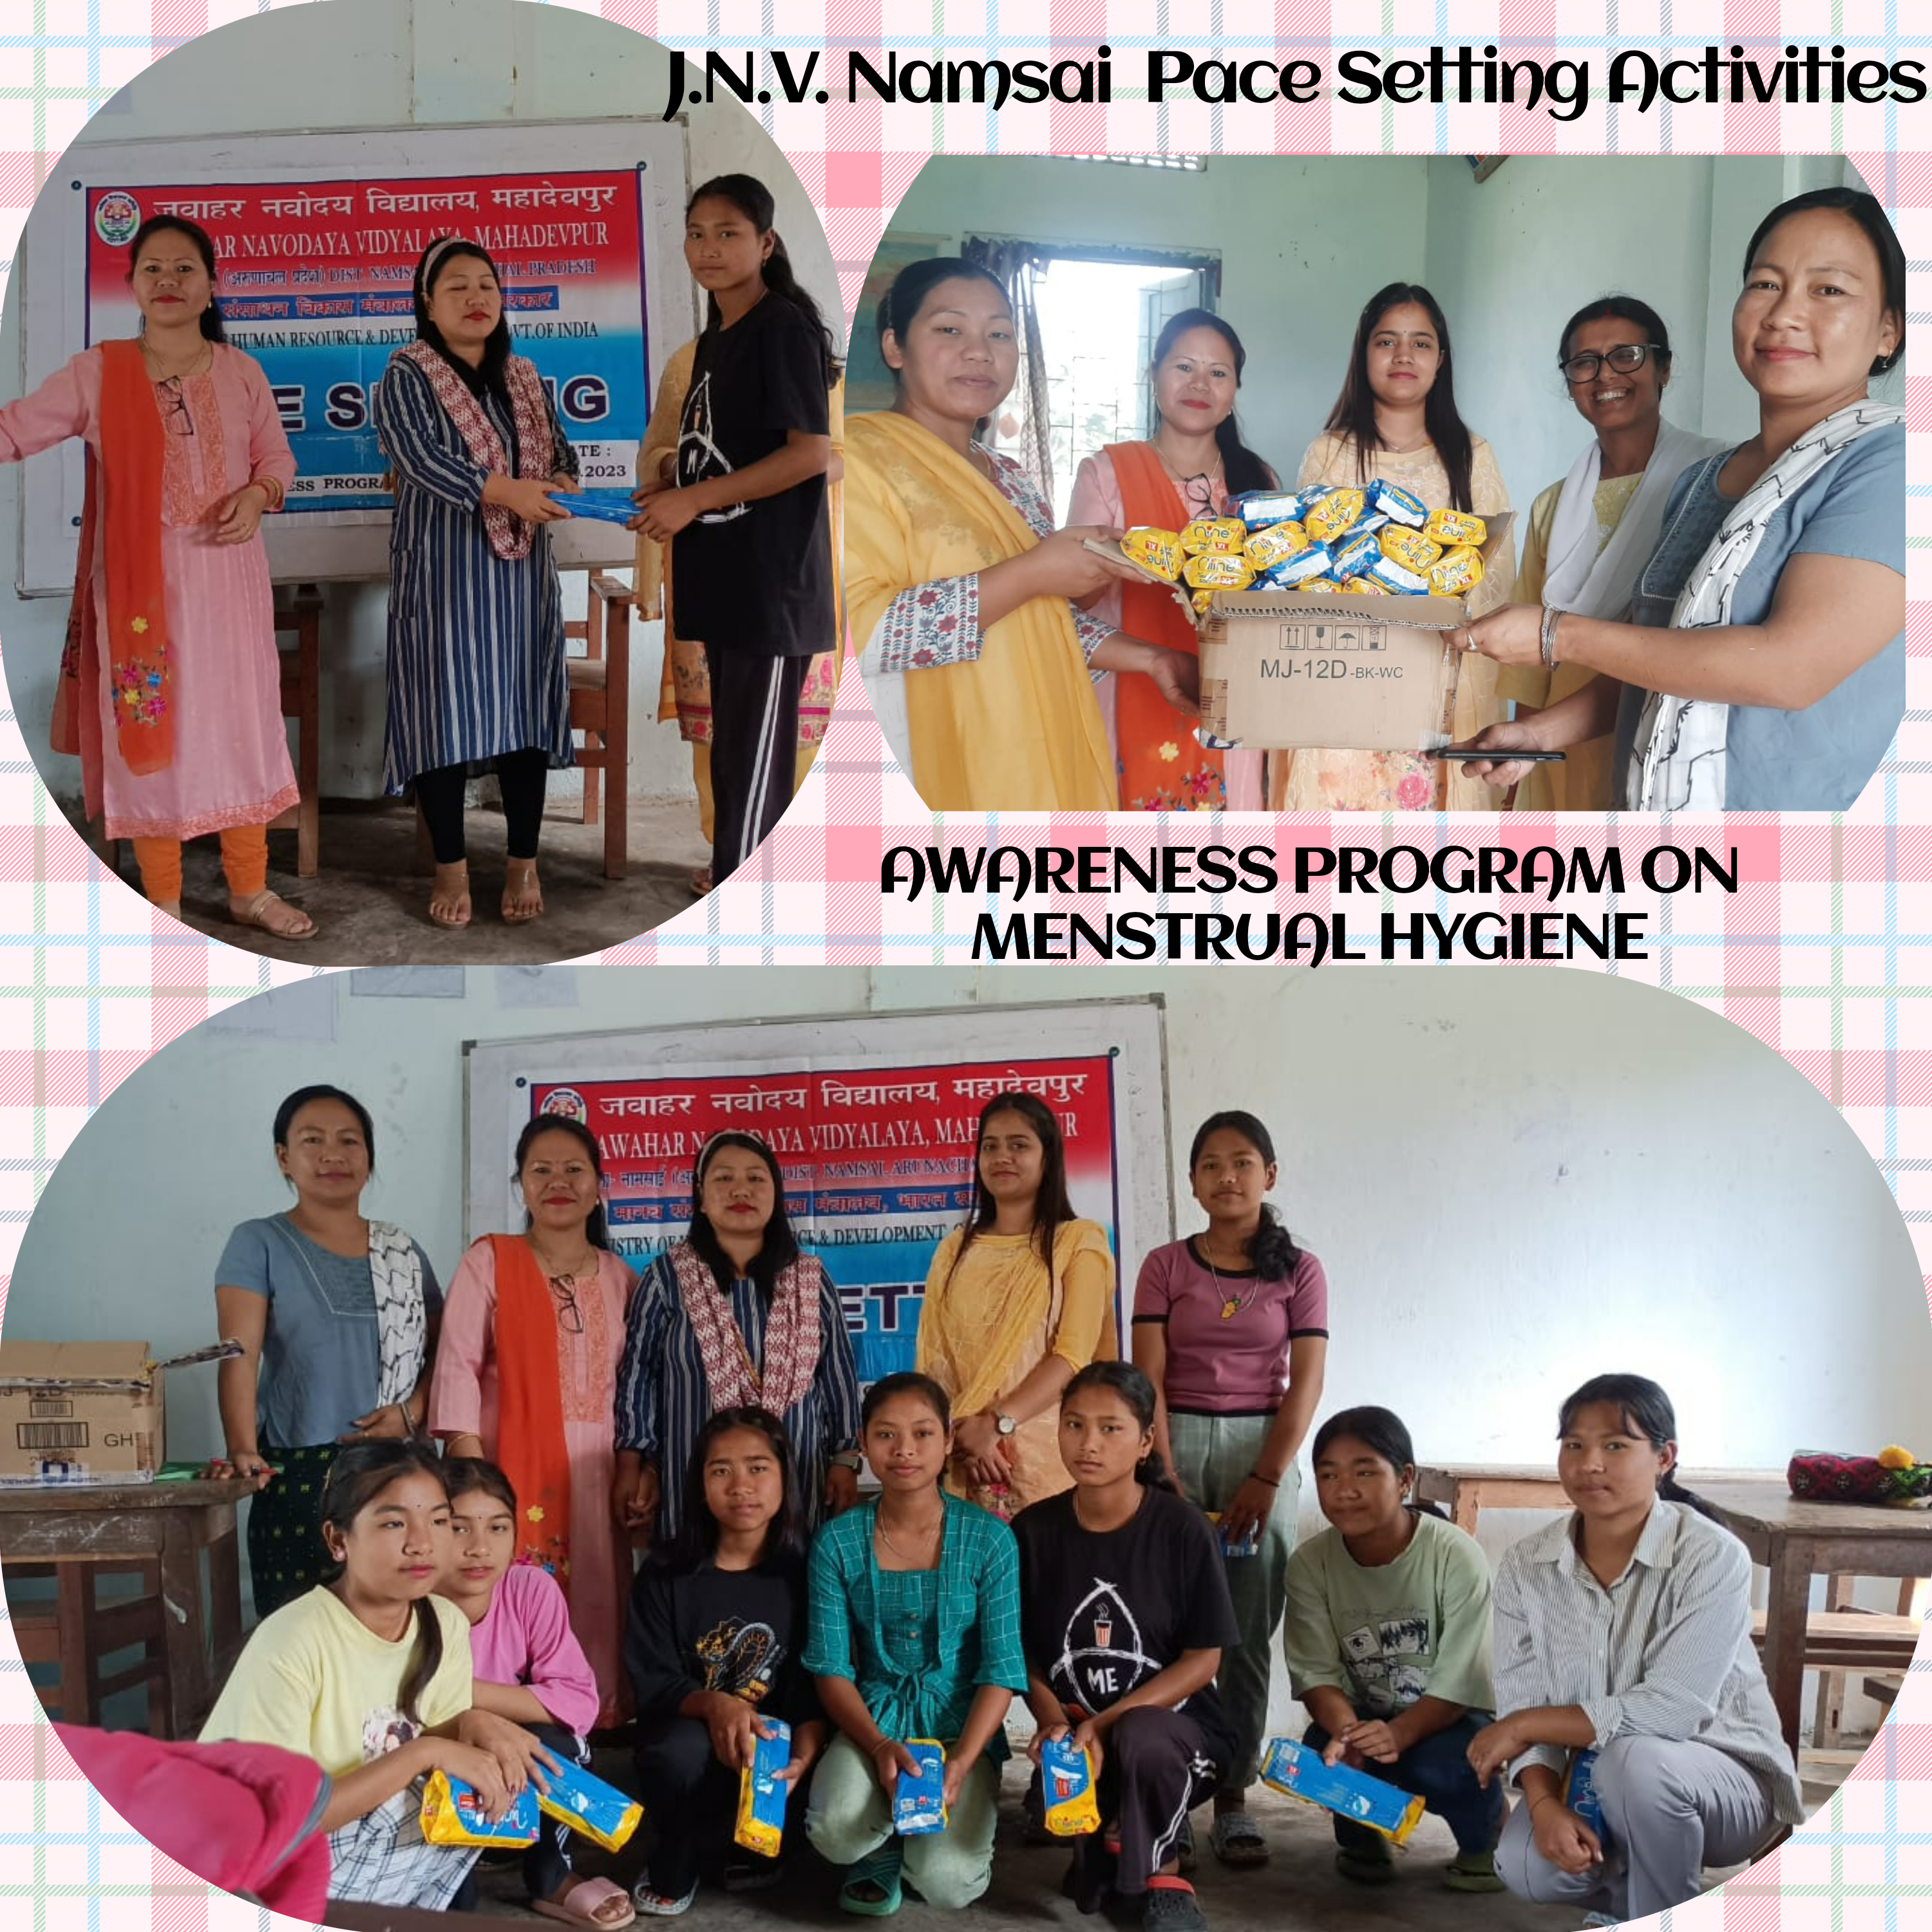 (c) Distribution of sanitary pads under Pace setting activities